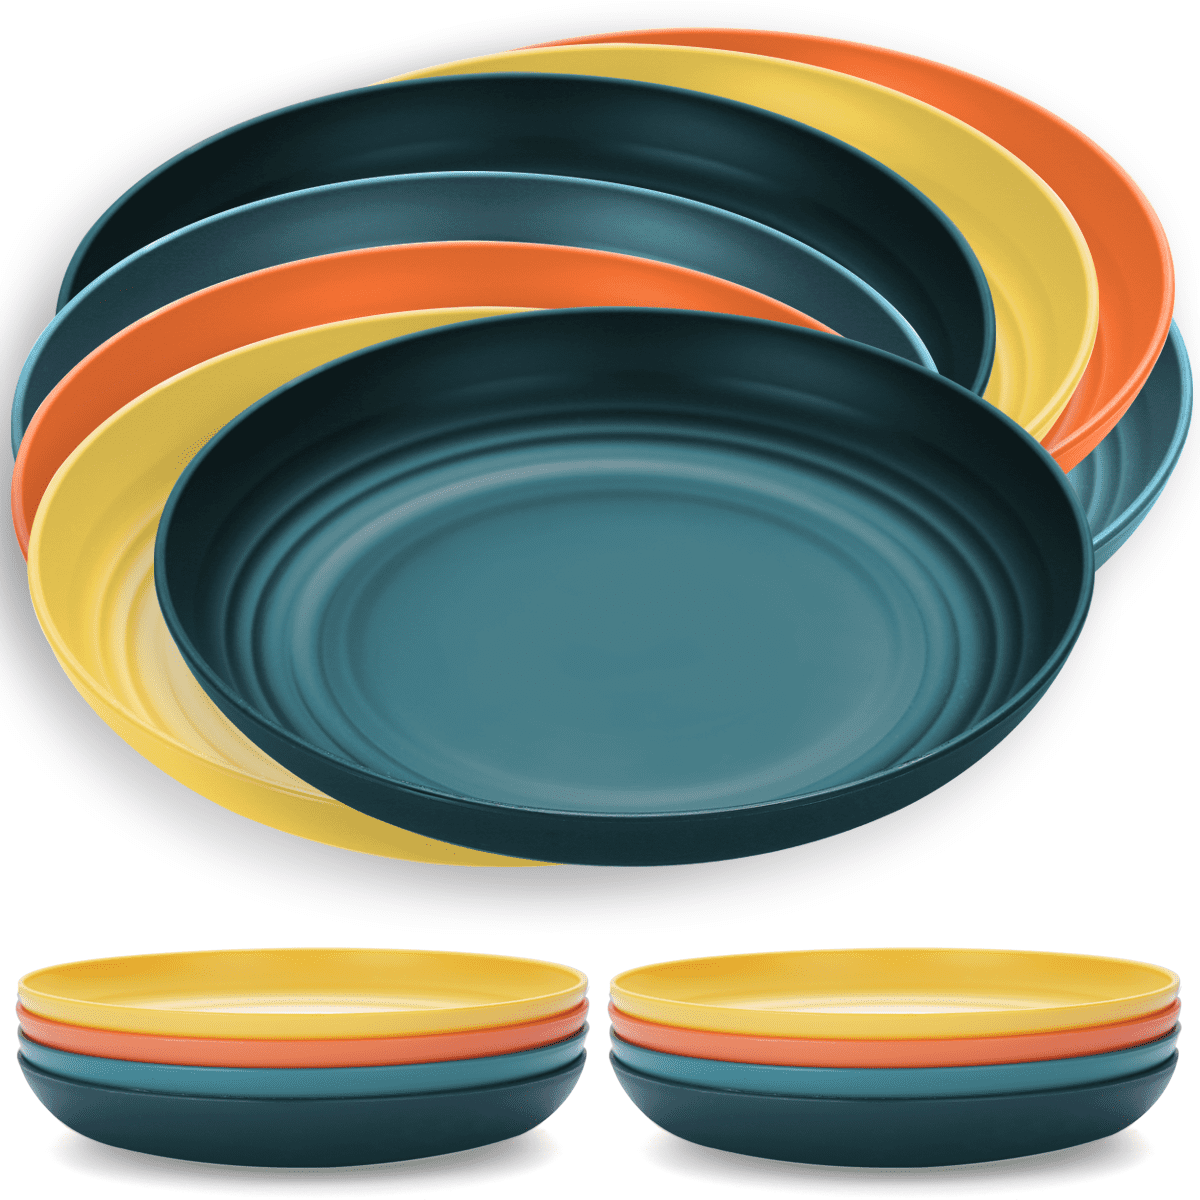 BPA free and Healthy Details about   Lightweight Wheat Straw Plates,Unbreakable Dinner Plates 